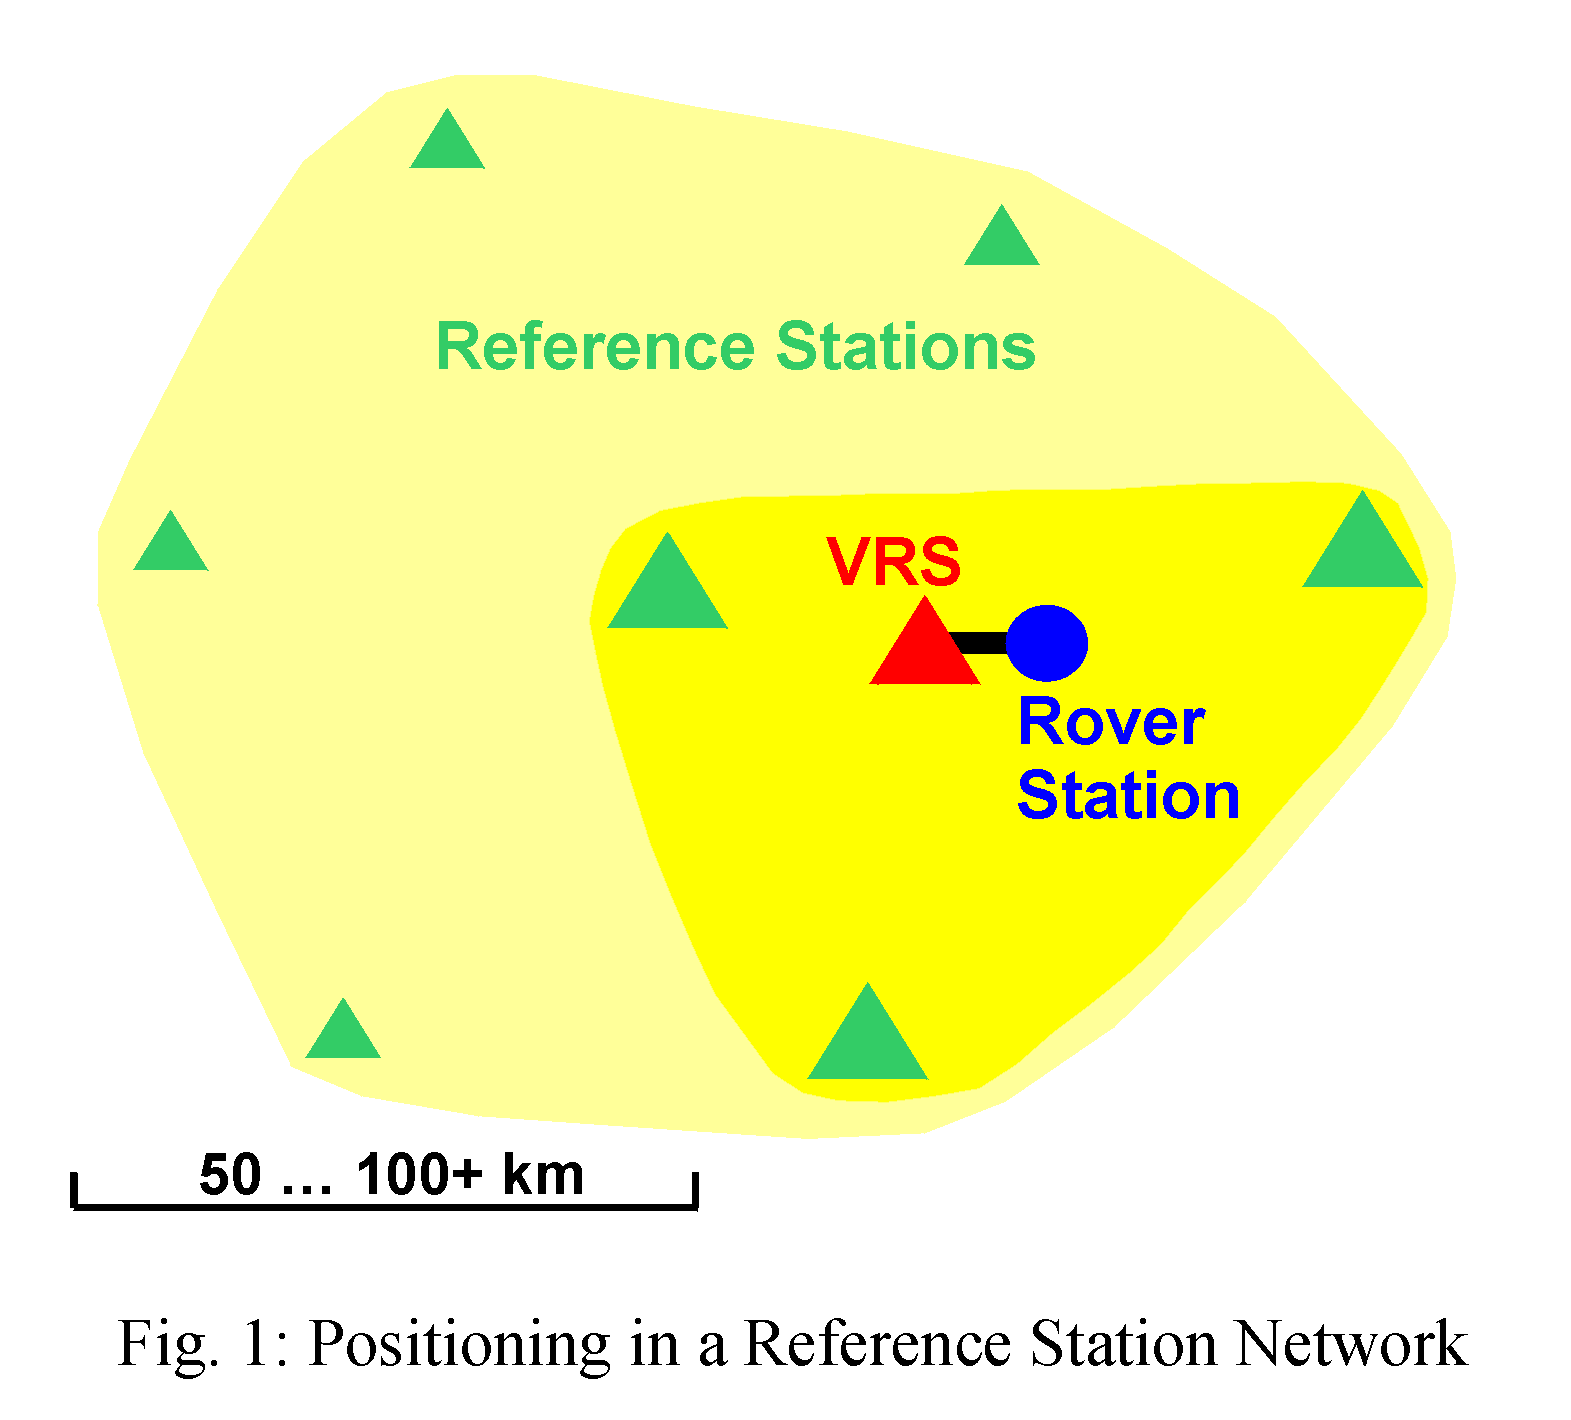 Fig. 1: Reference Station Network and Rover Station